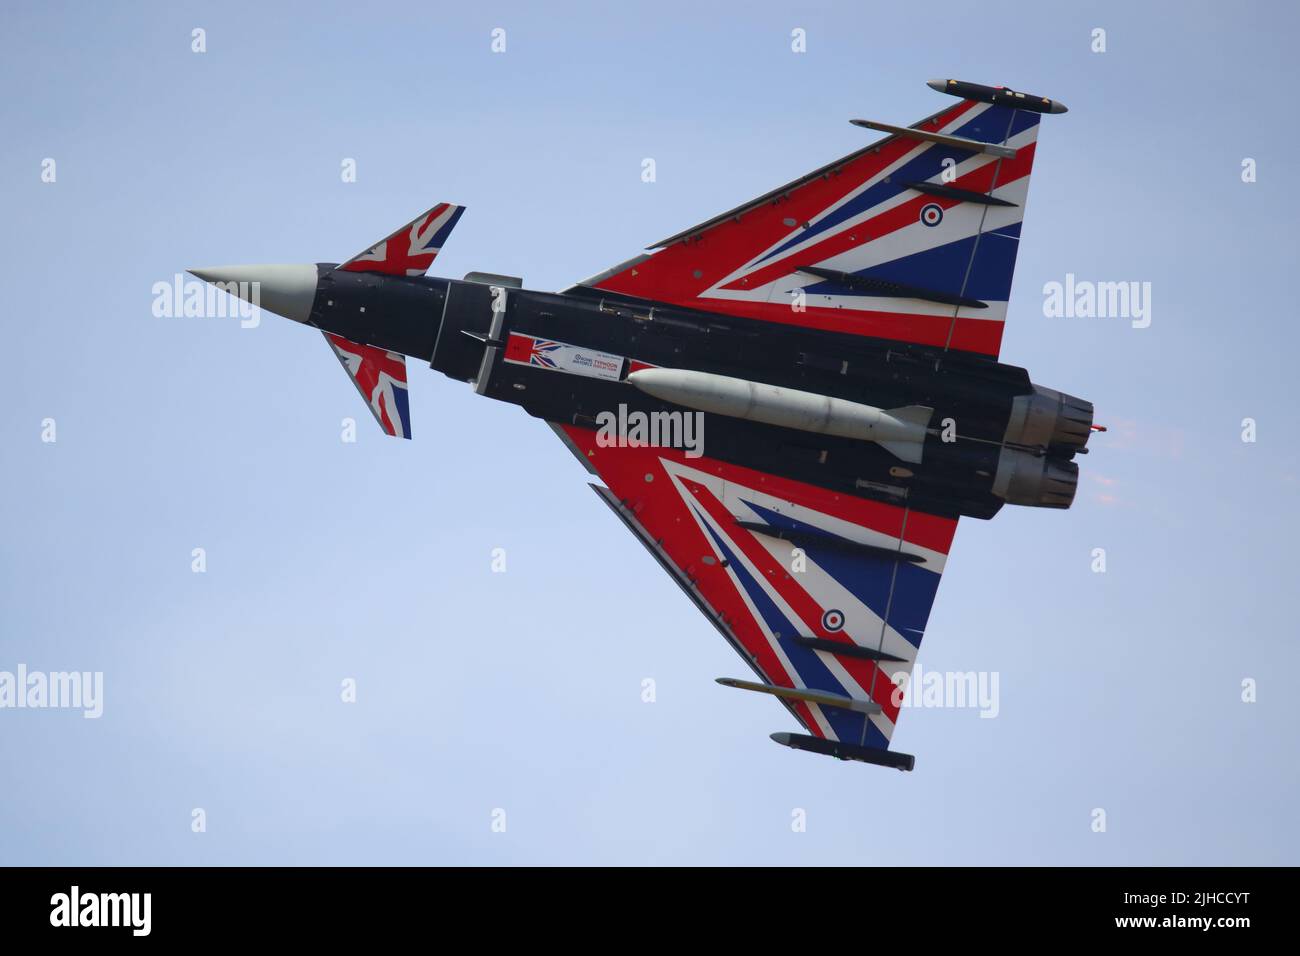 Fairford, UK. 16th July, 2022. Military aircraft from across the globe on display for the RIAT Royal International Air Tattoo. The RAF fielded a Typhoon Eurofighter with a special livery. Credit: Uwe Deffner/Alamy Live News Stock Photo